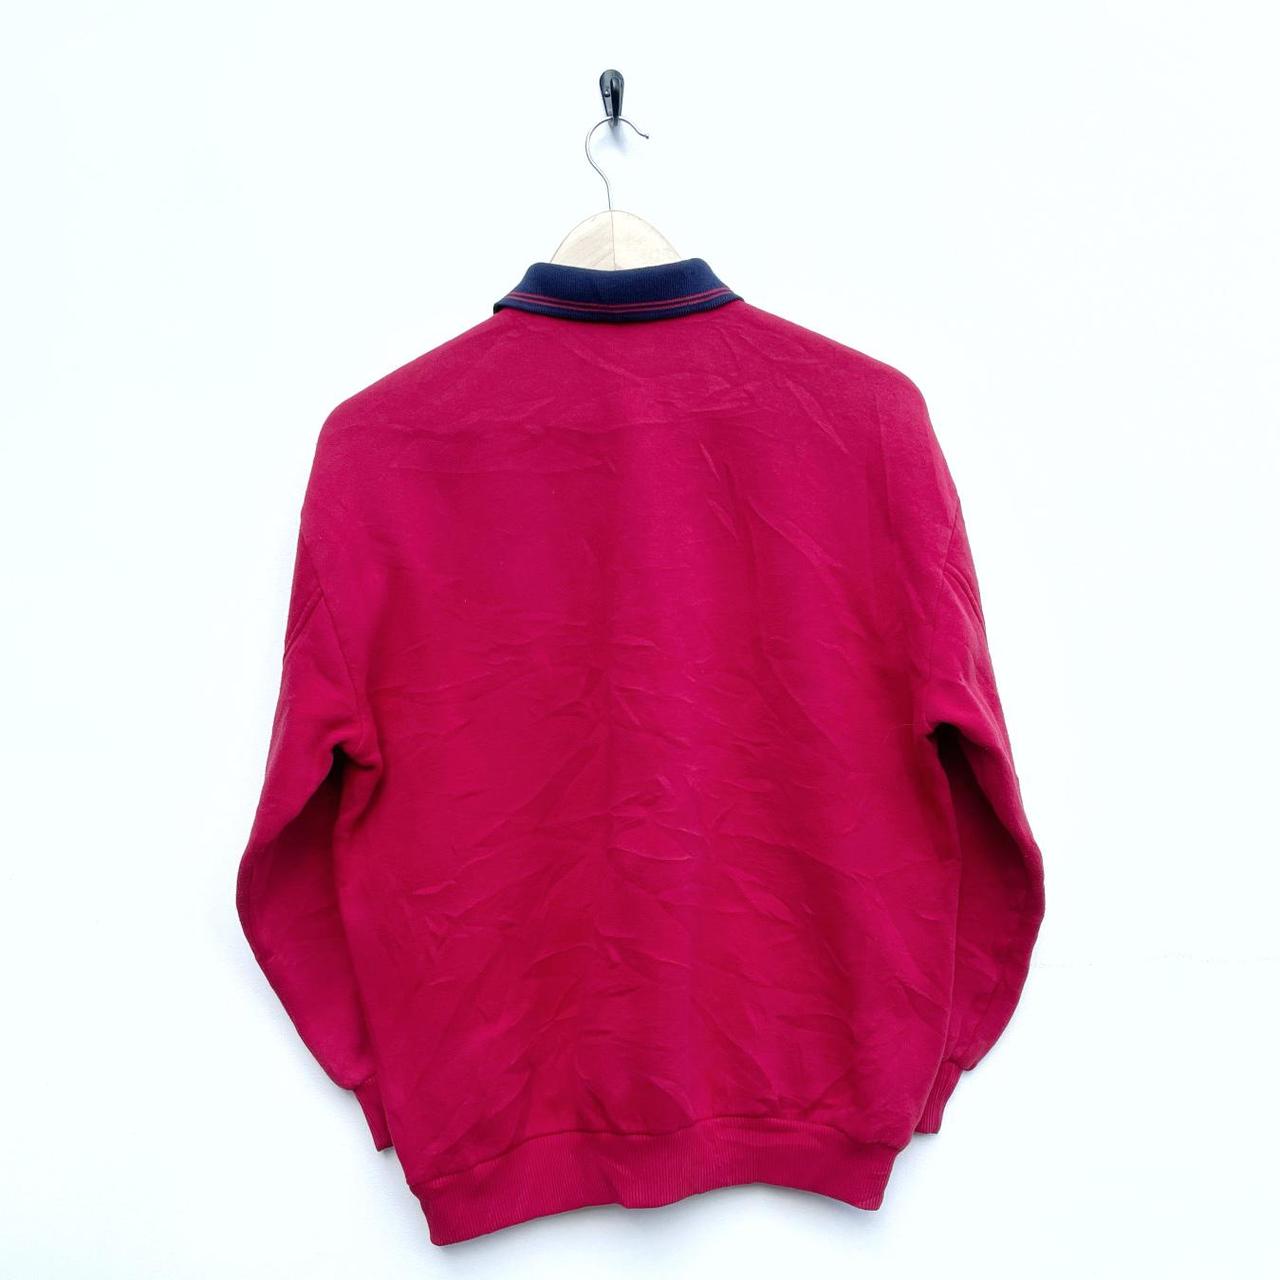 Product Image 2 - Vintage 90s collared sweatshirt, features